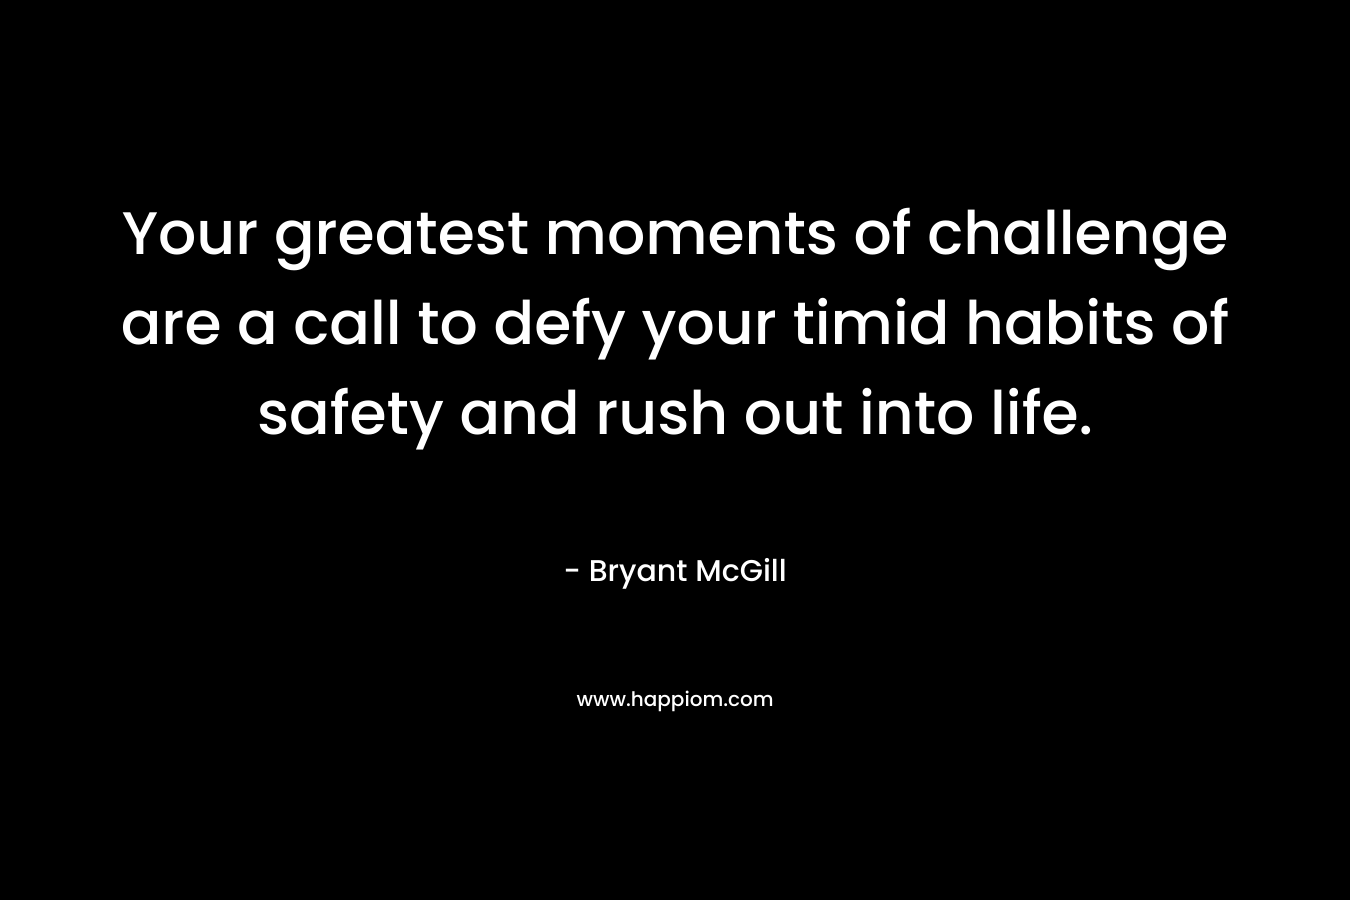 Your greatest moments of challenge are a call to defy your timid habits of safety and rush out into life. – Bryant McGill